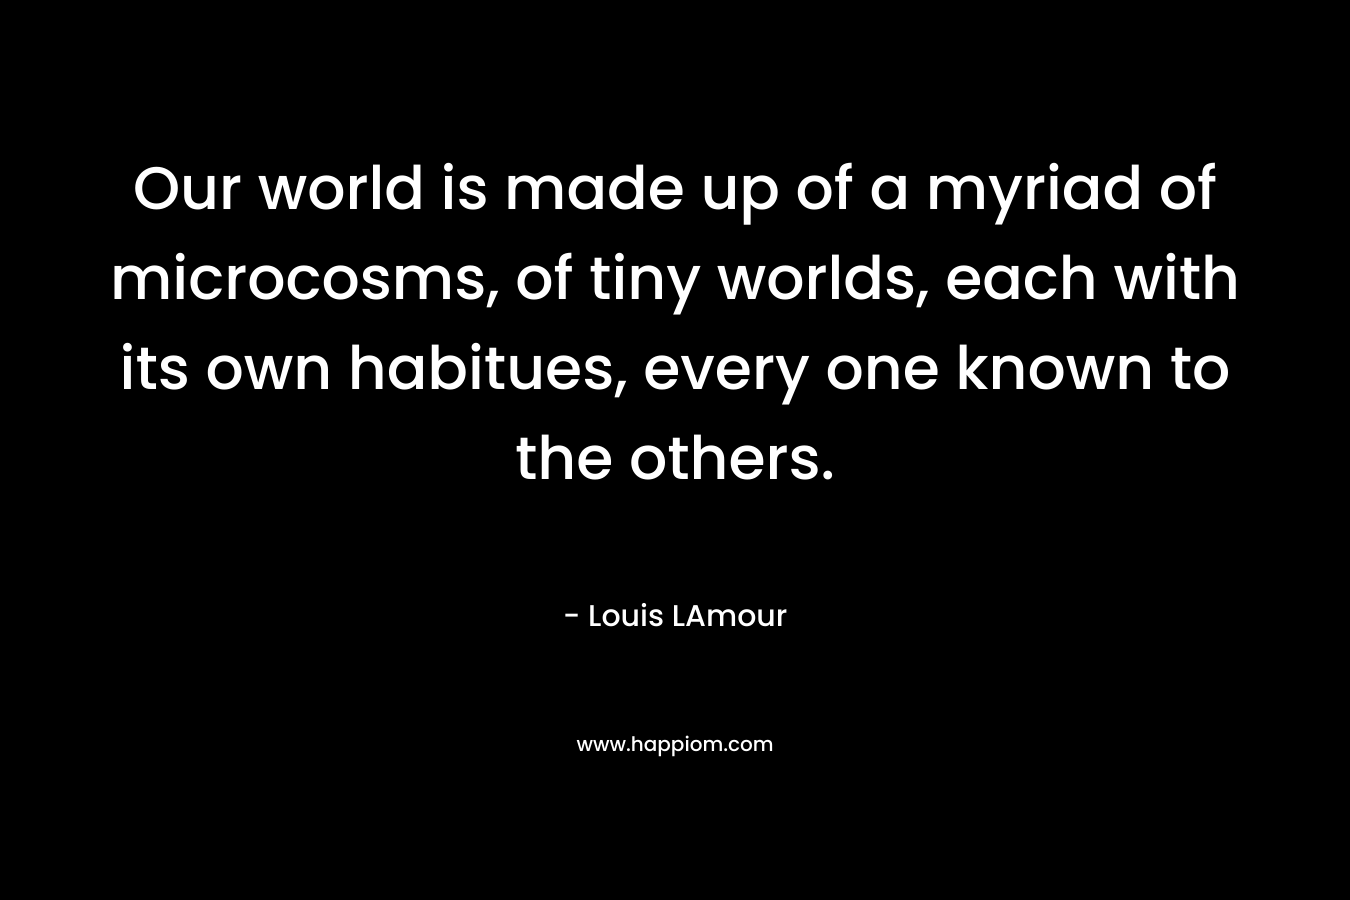 Our world is made up of a myriad of microcosms, of tiny worlds, each with its own habitues, every one known to the others.